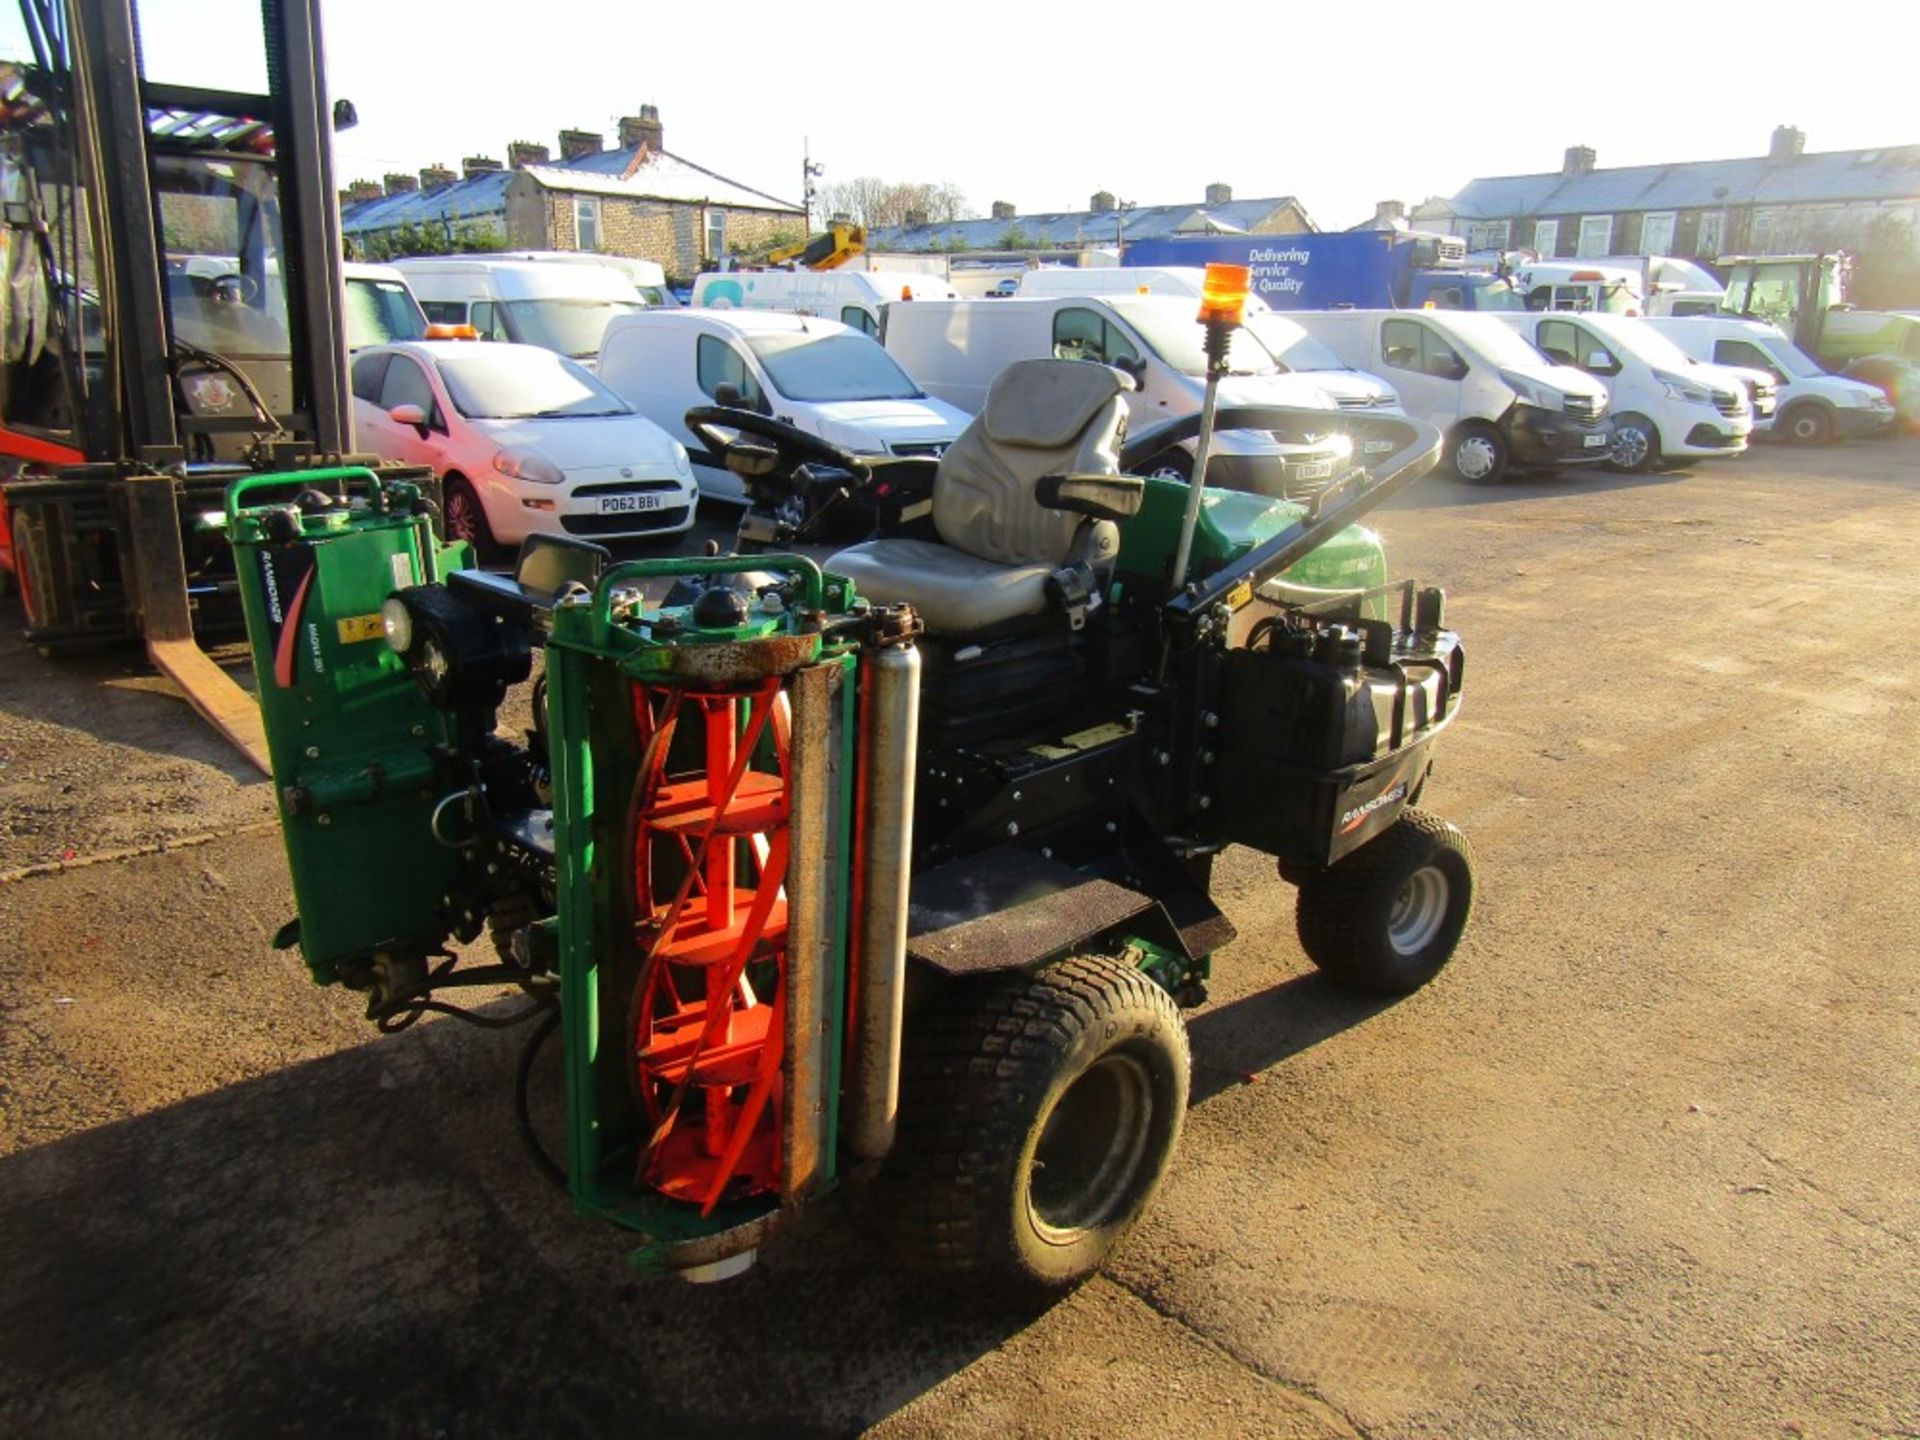 18 reg RANSOMES PARKWAY 3 TRIPLE RIDE ON MOWER (DIRECT COUNCIL) 1ST REG 05/18, 224 HOURS - Image 2 of 6